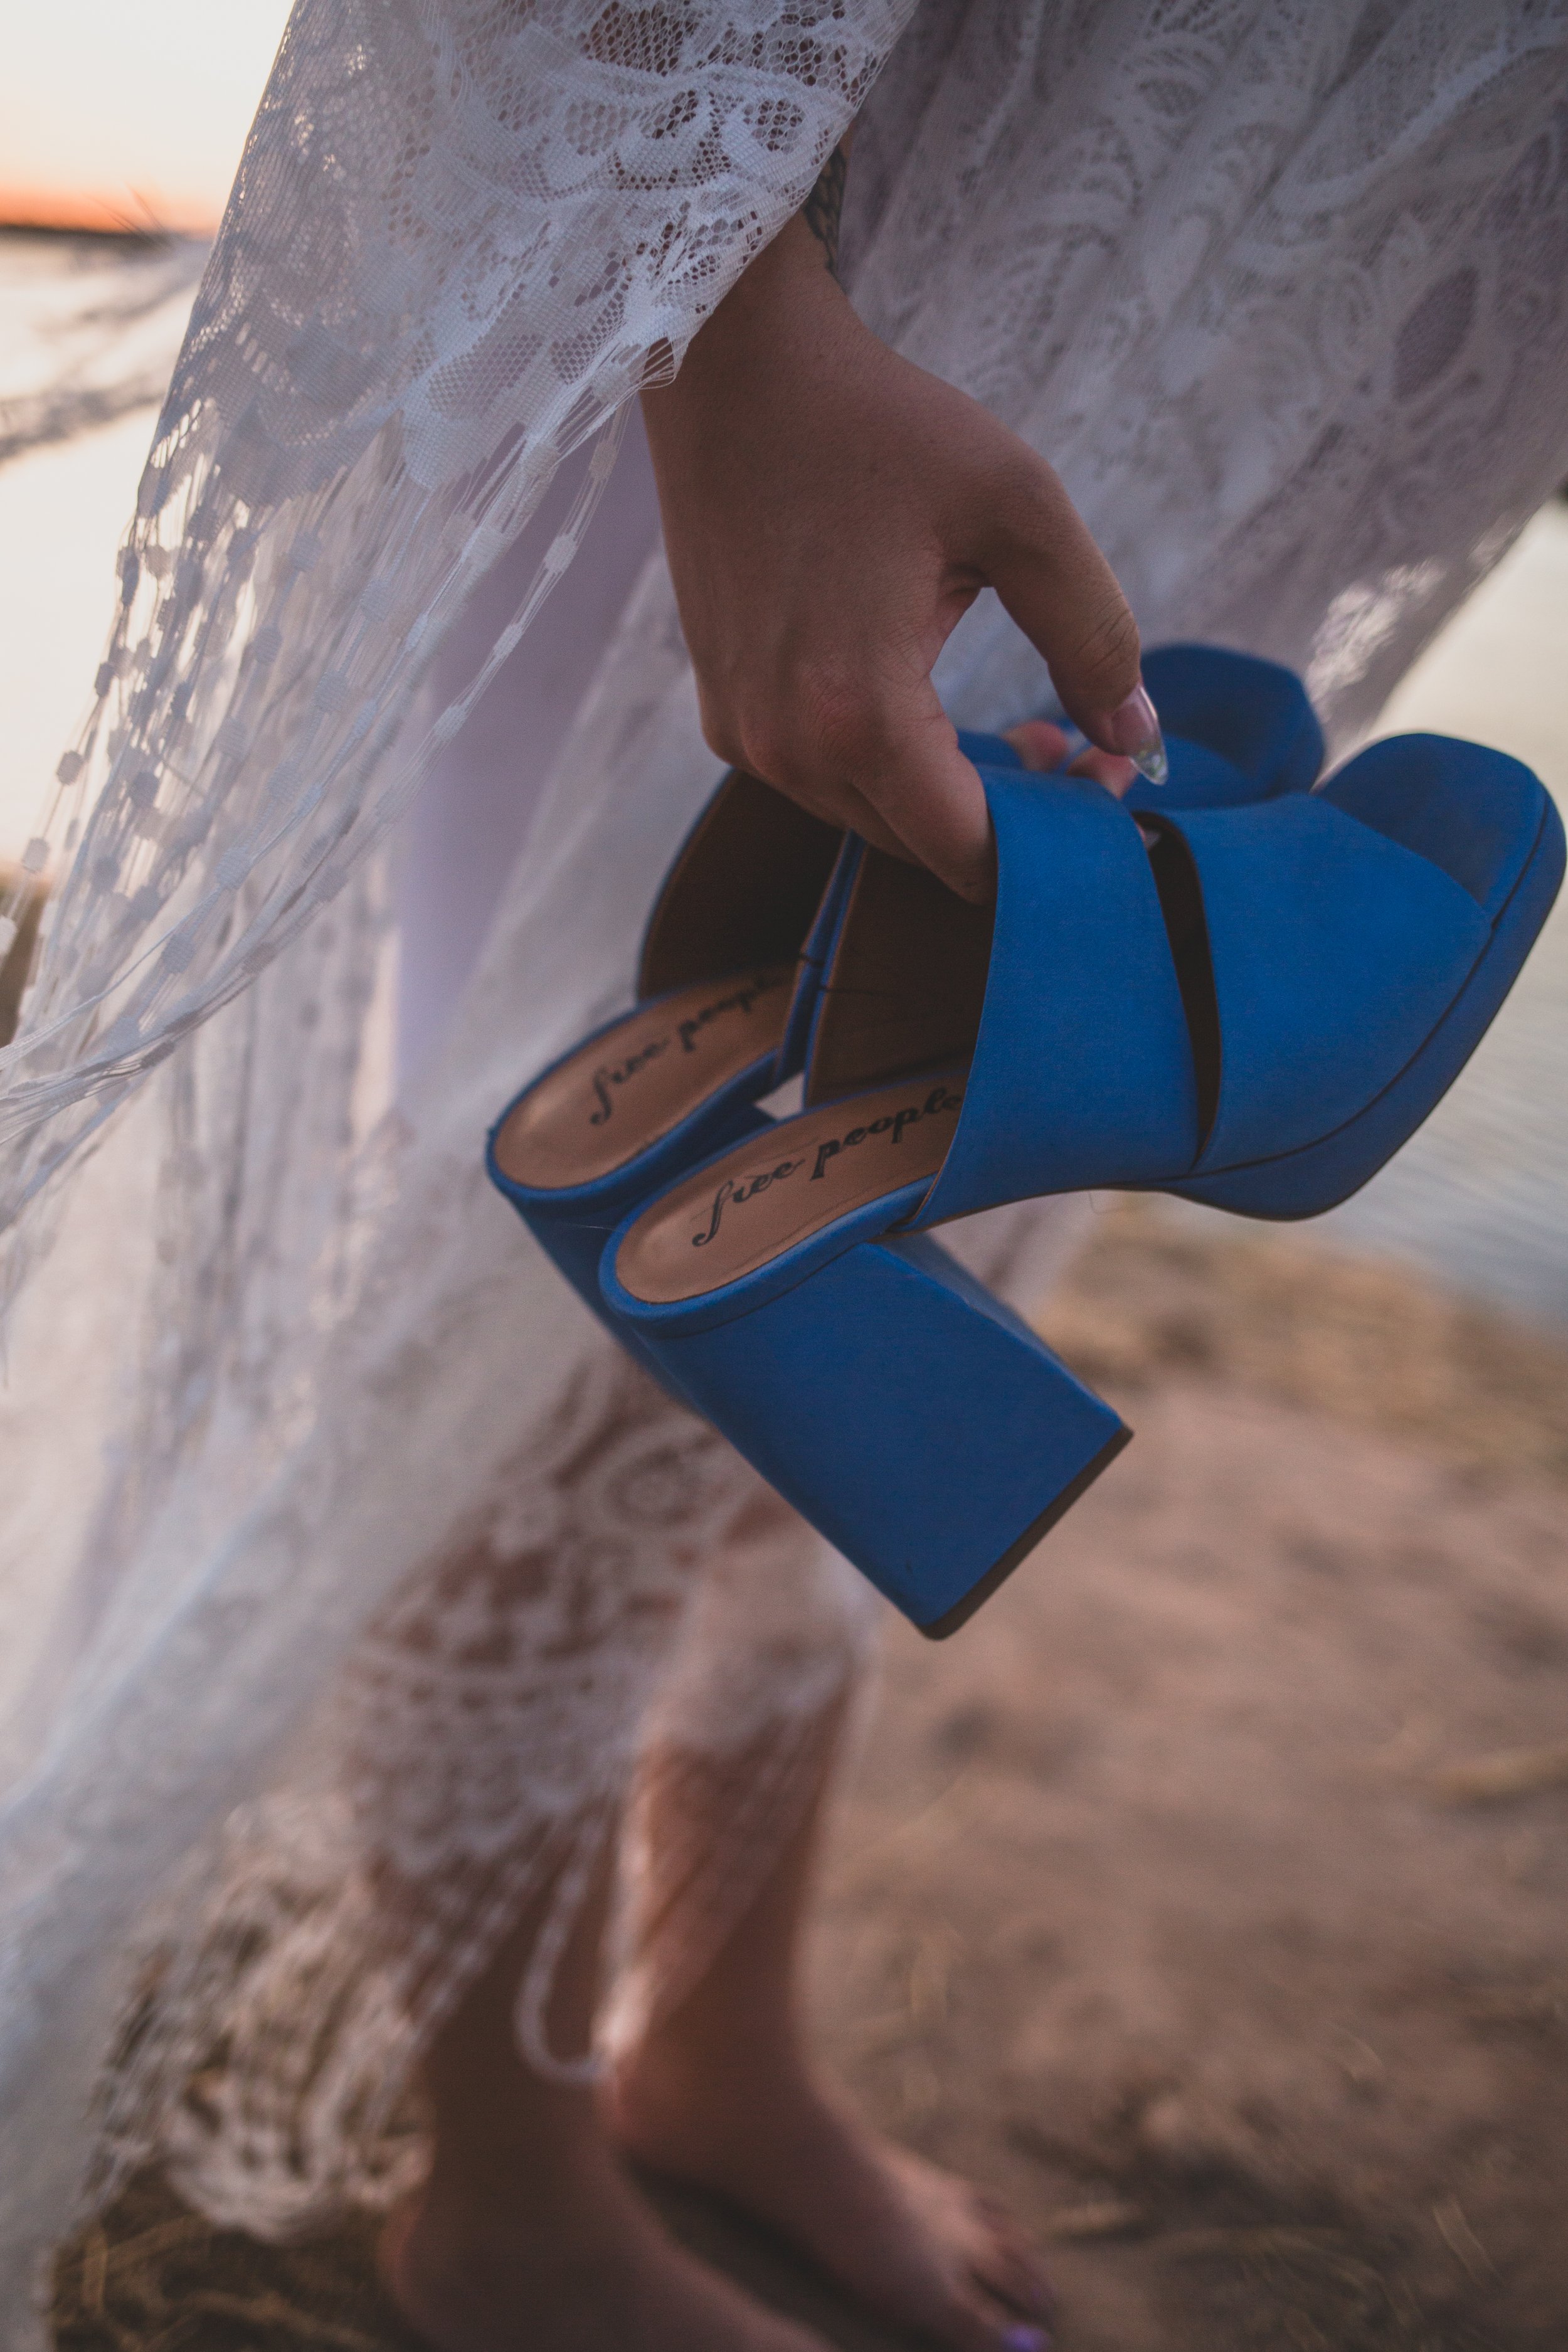 Details of shoes of pregnant mother posing for maternity photos near the water at sunset the Salt River by timeless Phoenix maternity photographer; Jennifer Lind Schutsky.